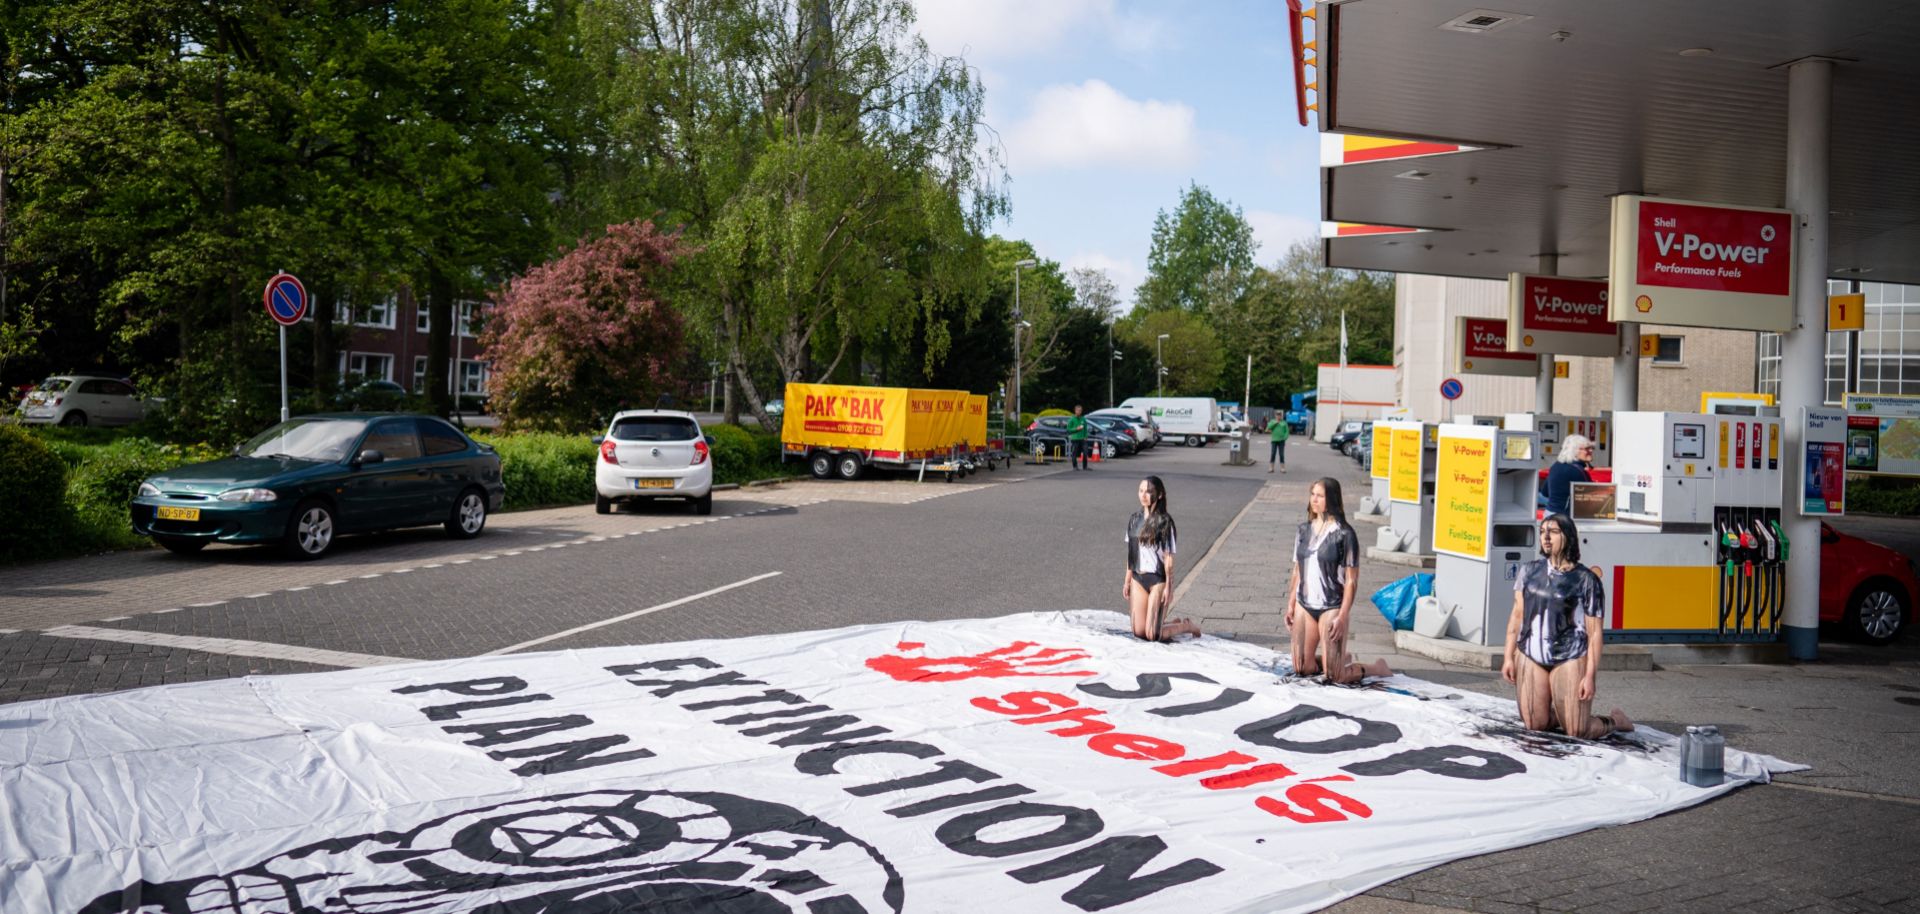 Environmental activists covered in black paint take part in a demonstration at a Shell gas station in The Hague, Netherlands, on May 18, 2021. 